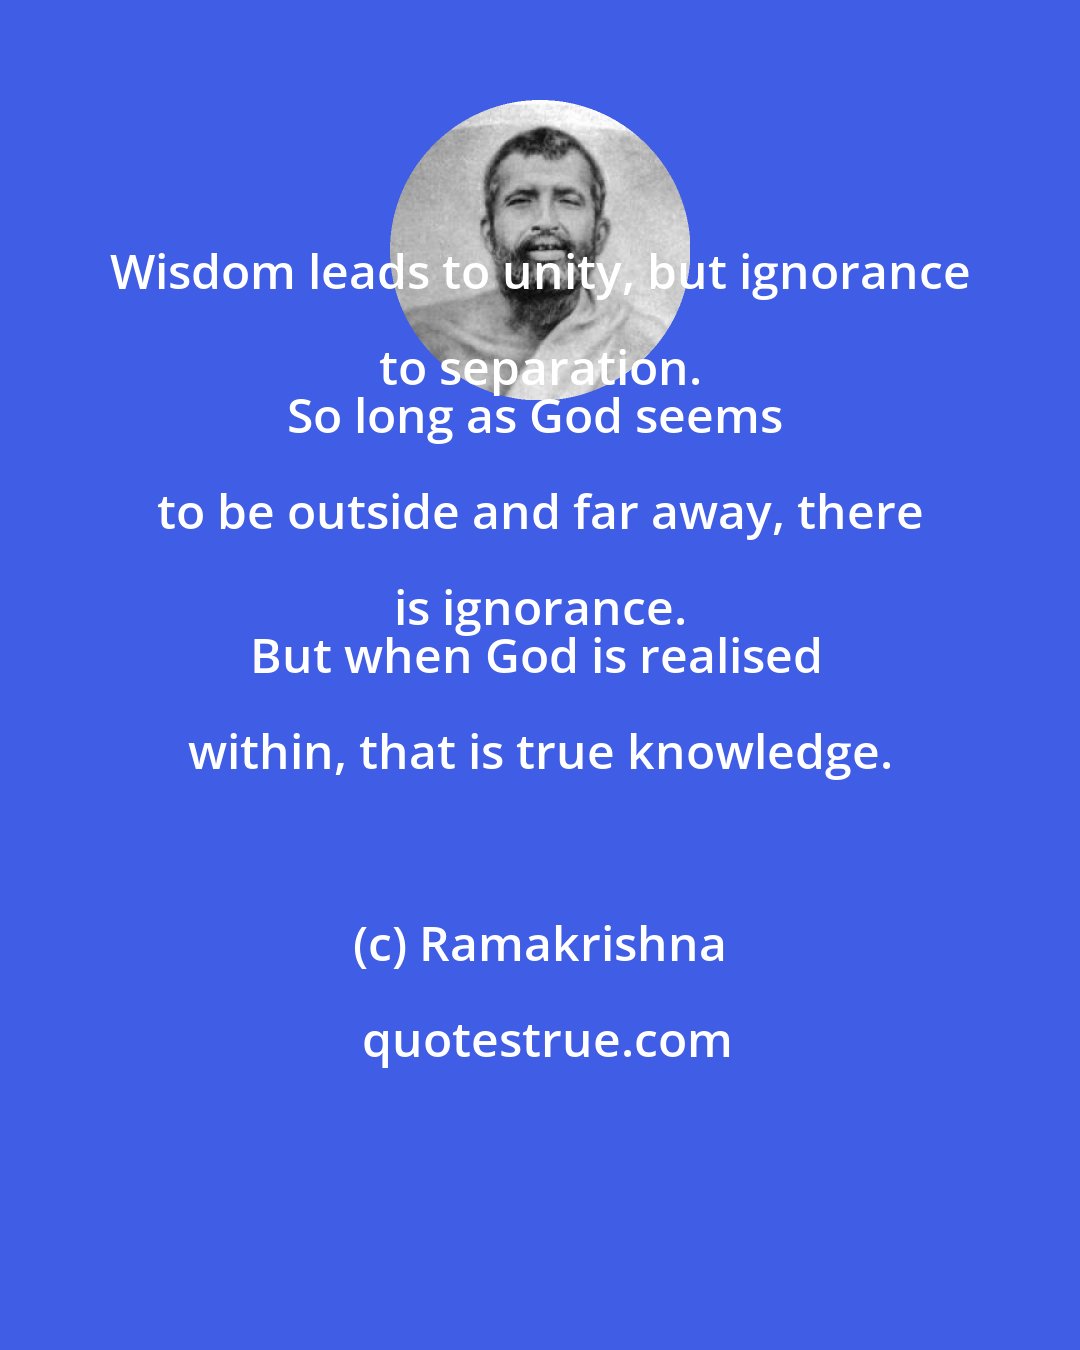 Ramakrishna: Wisdom leads to unity, but ignorance to separation. 
So long as God seems to be outside and far away, there is ignorance. 
But when God is realised within, that is true knowledge.